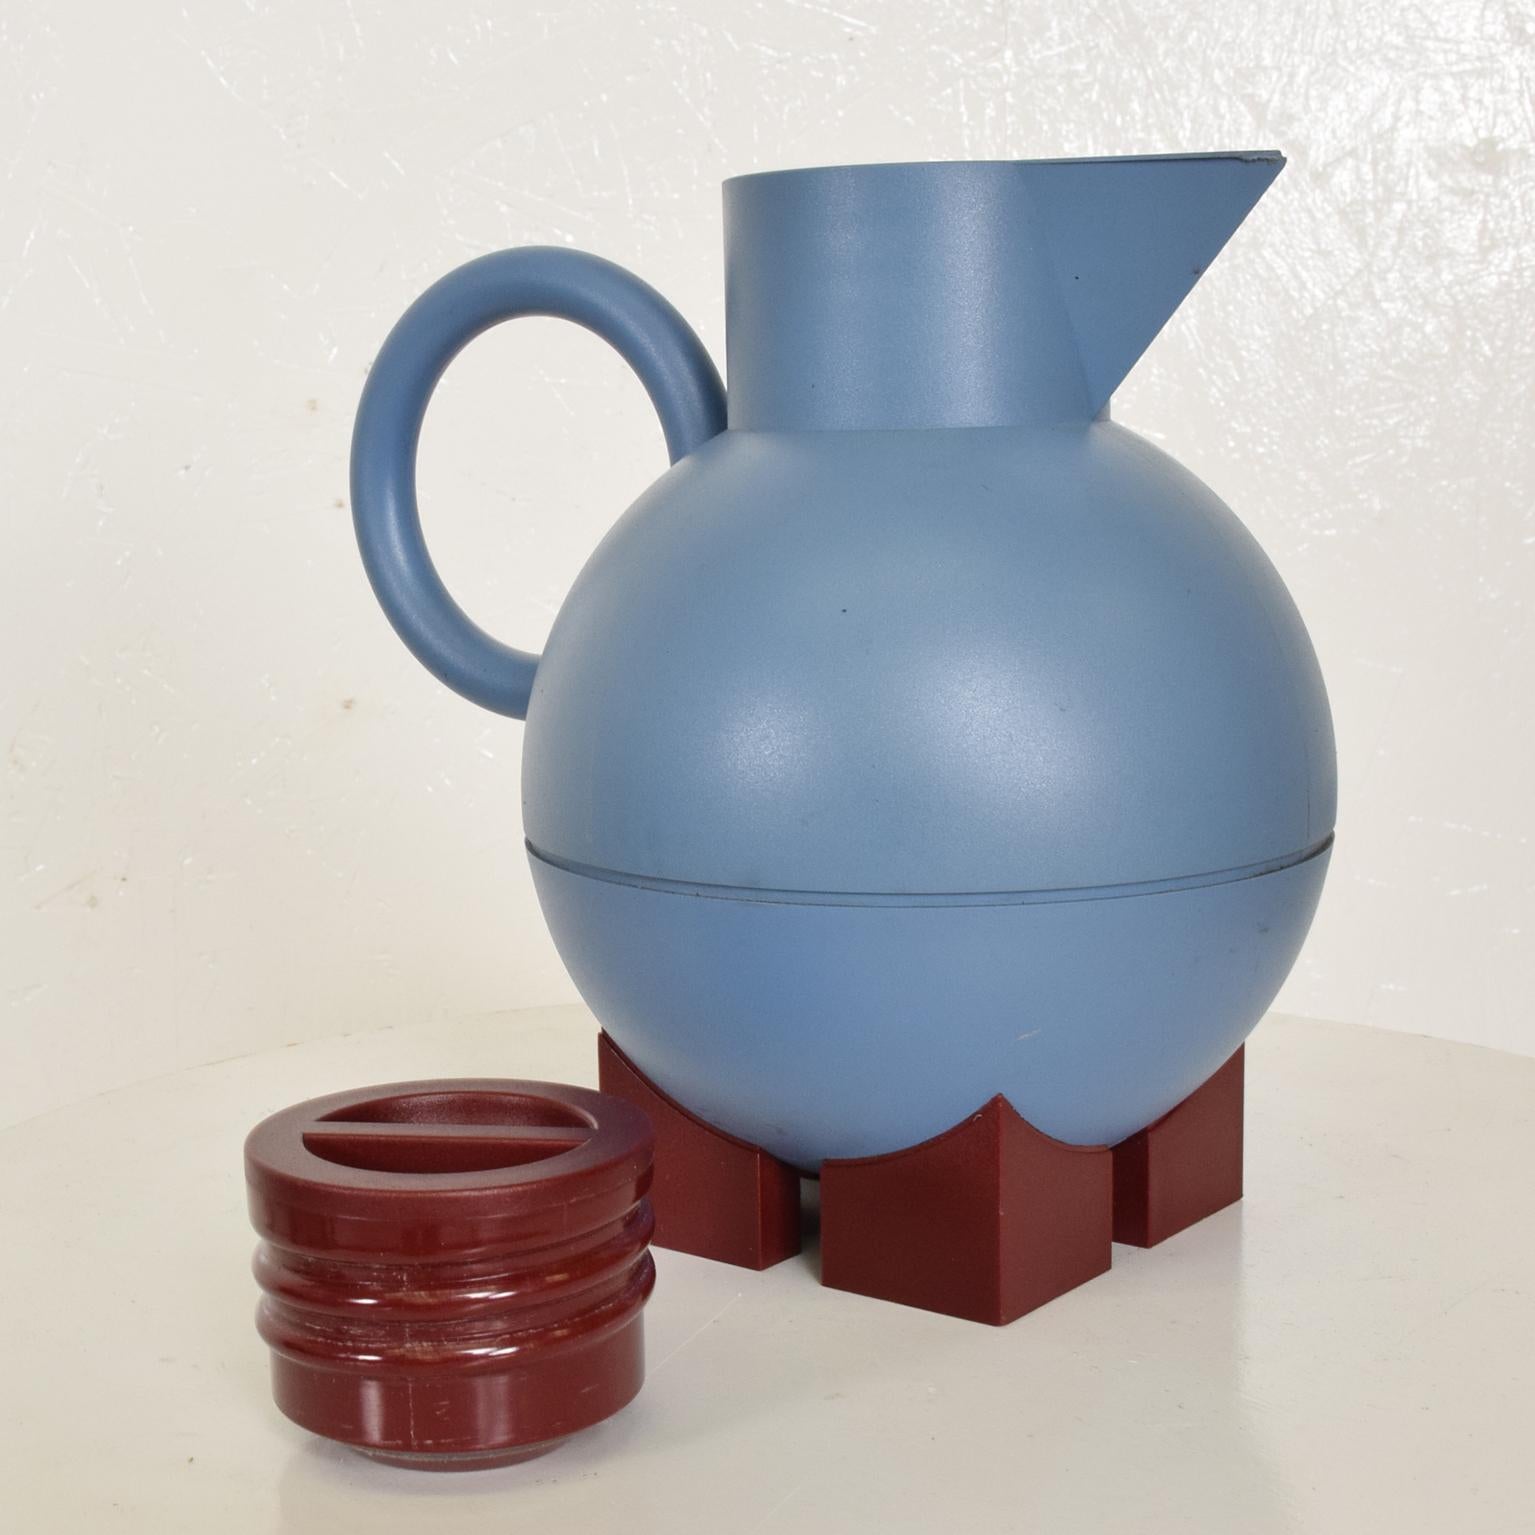 Italian Mid-Century Modern Thermos Carafe Model Euclid by Michael Graves for Alessi